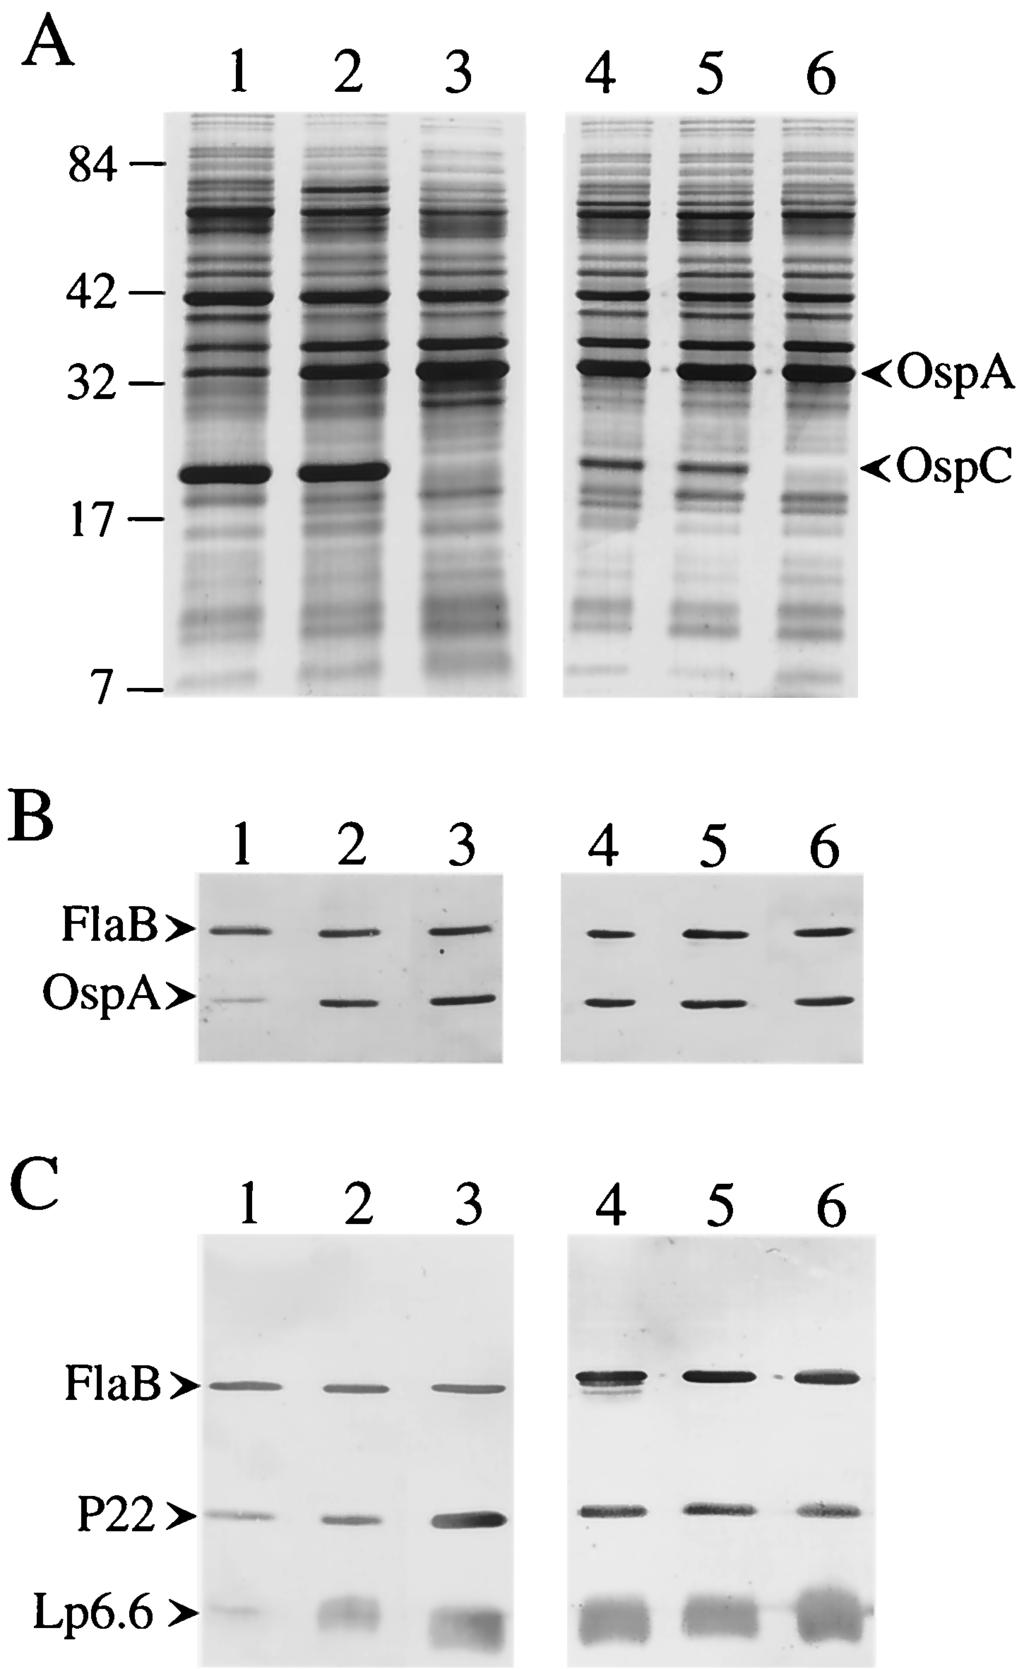 VOL. 69, 2001 NOTES 4161 FIG. 3. Northern blot analysis of the expression of ospab, flab, and ospc in B.